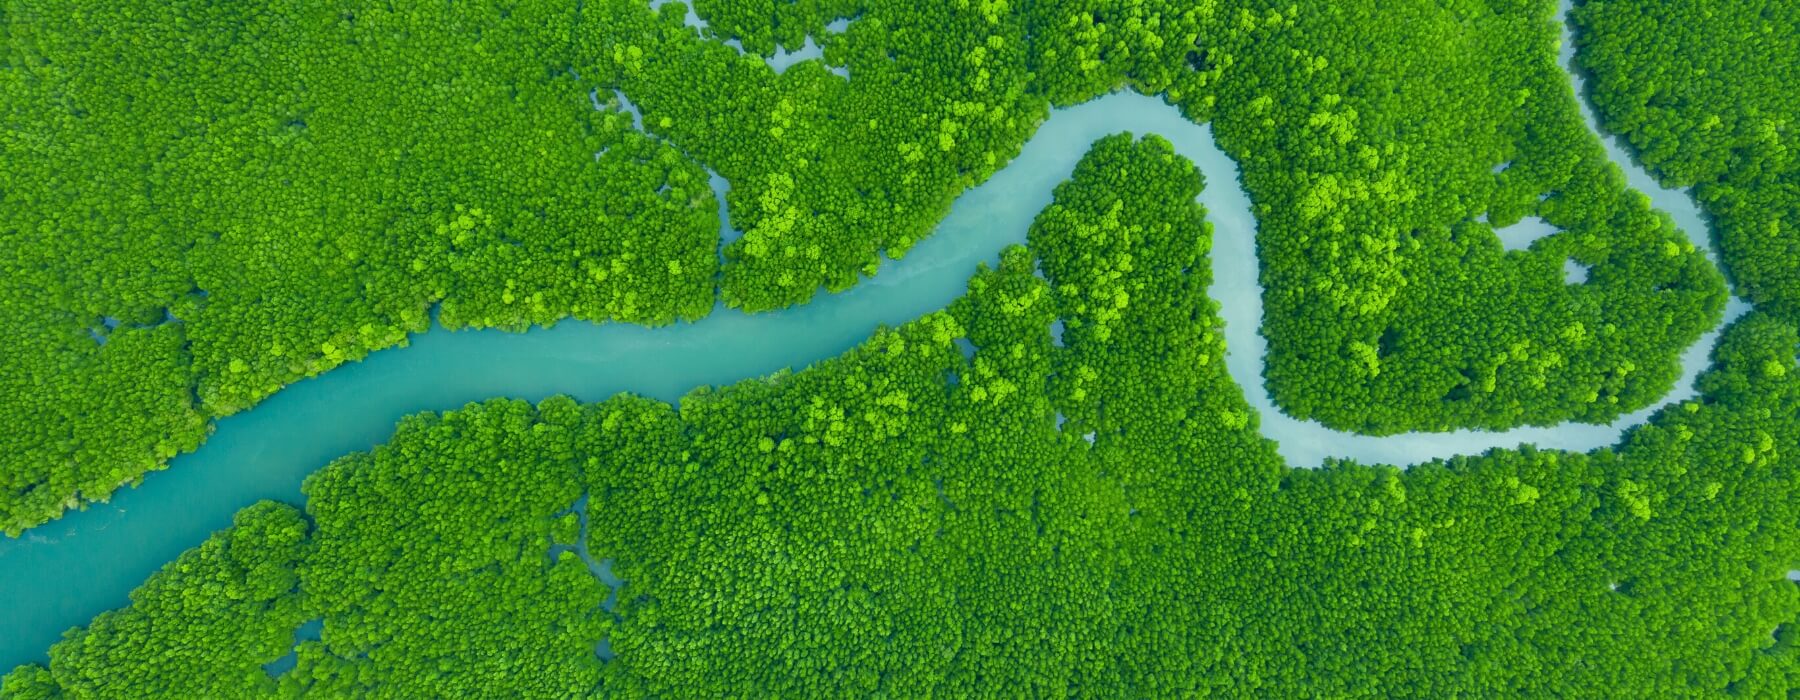 WHY YOU SHOULD VISIT THE PERUVIAN AMAZON RAINFOREST